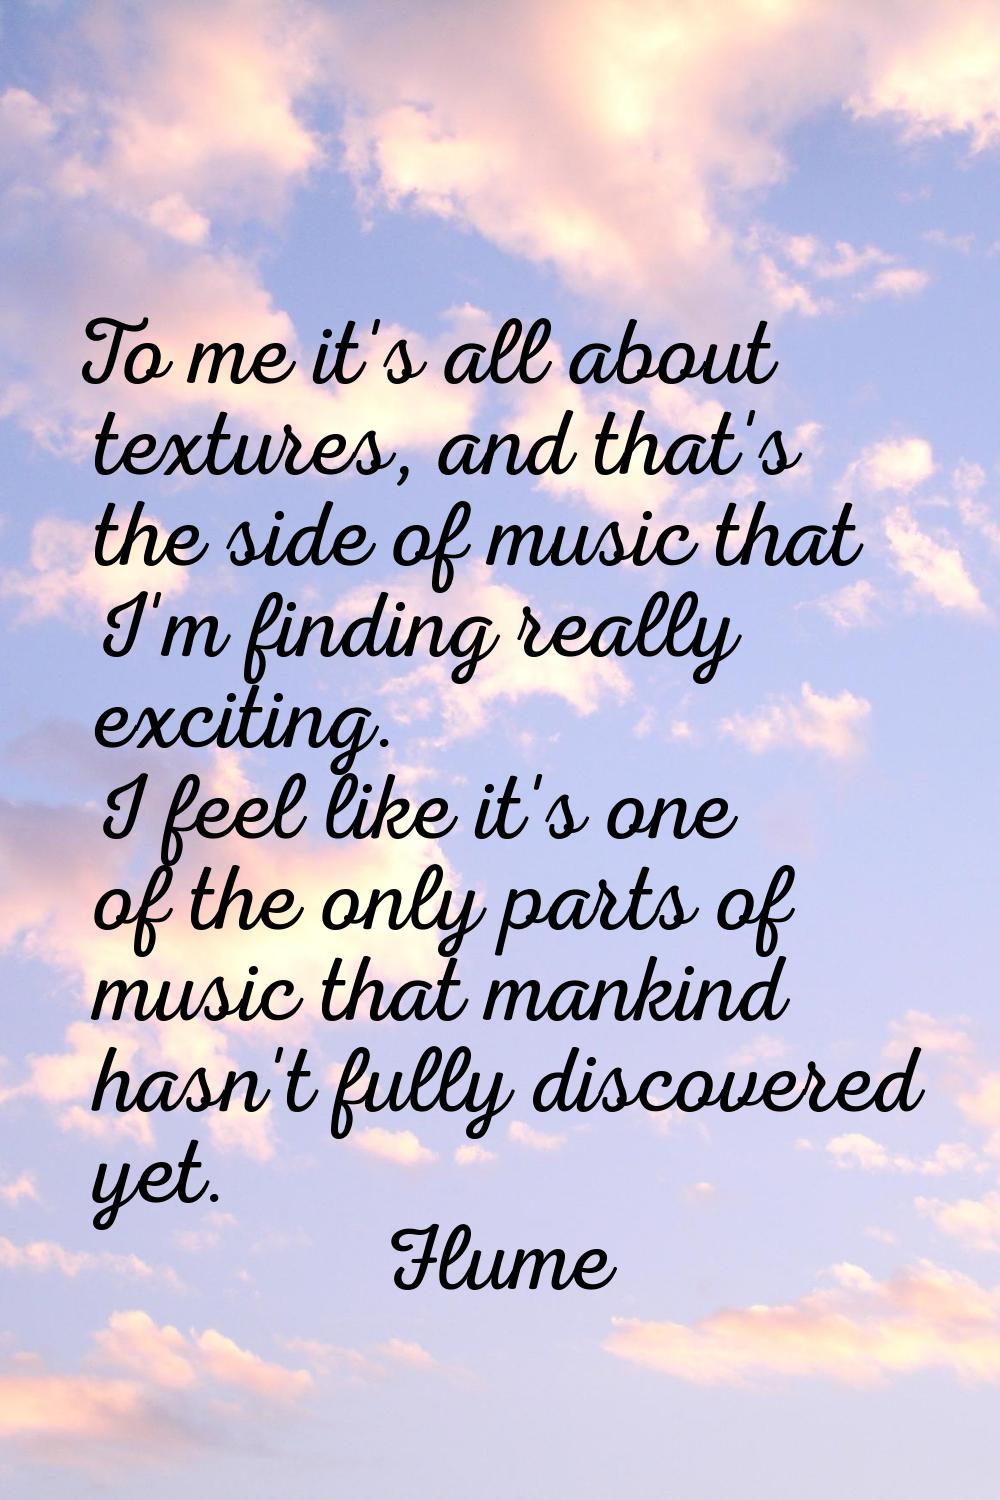 To me it's all about textures, and that's the side of music that I'm finding really exciting. I fee